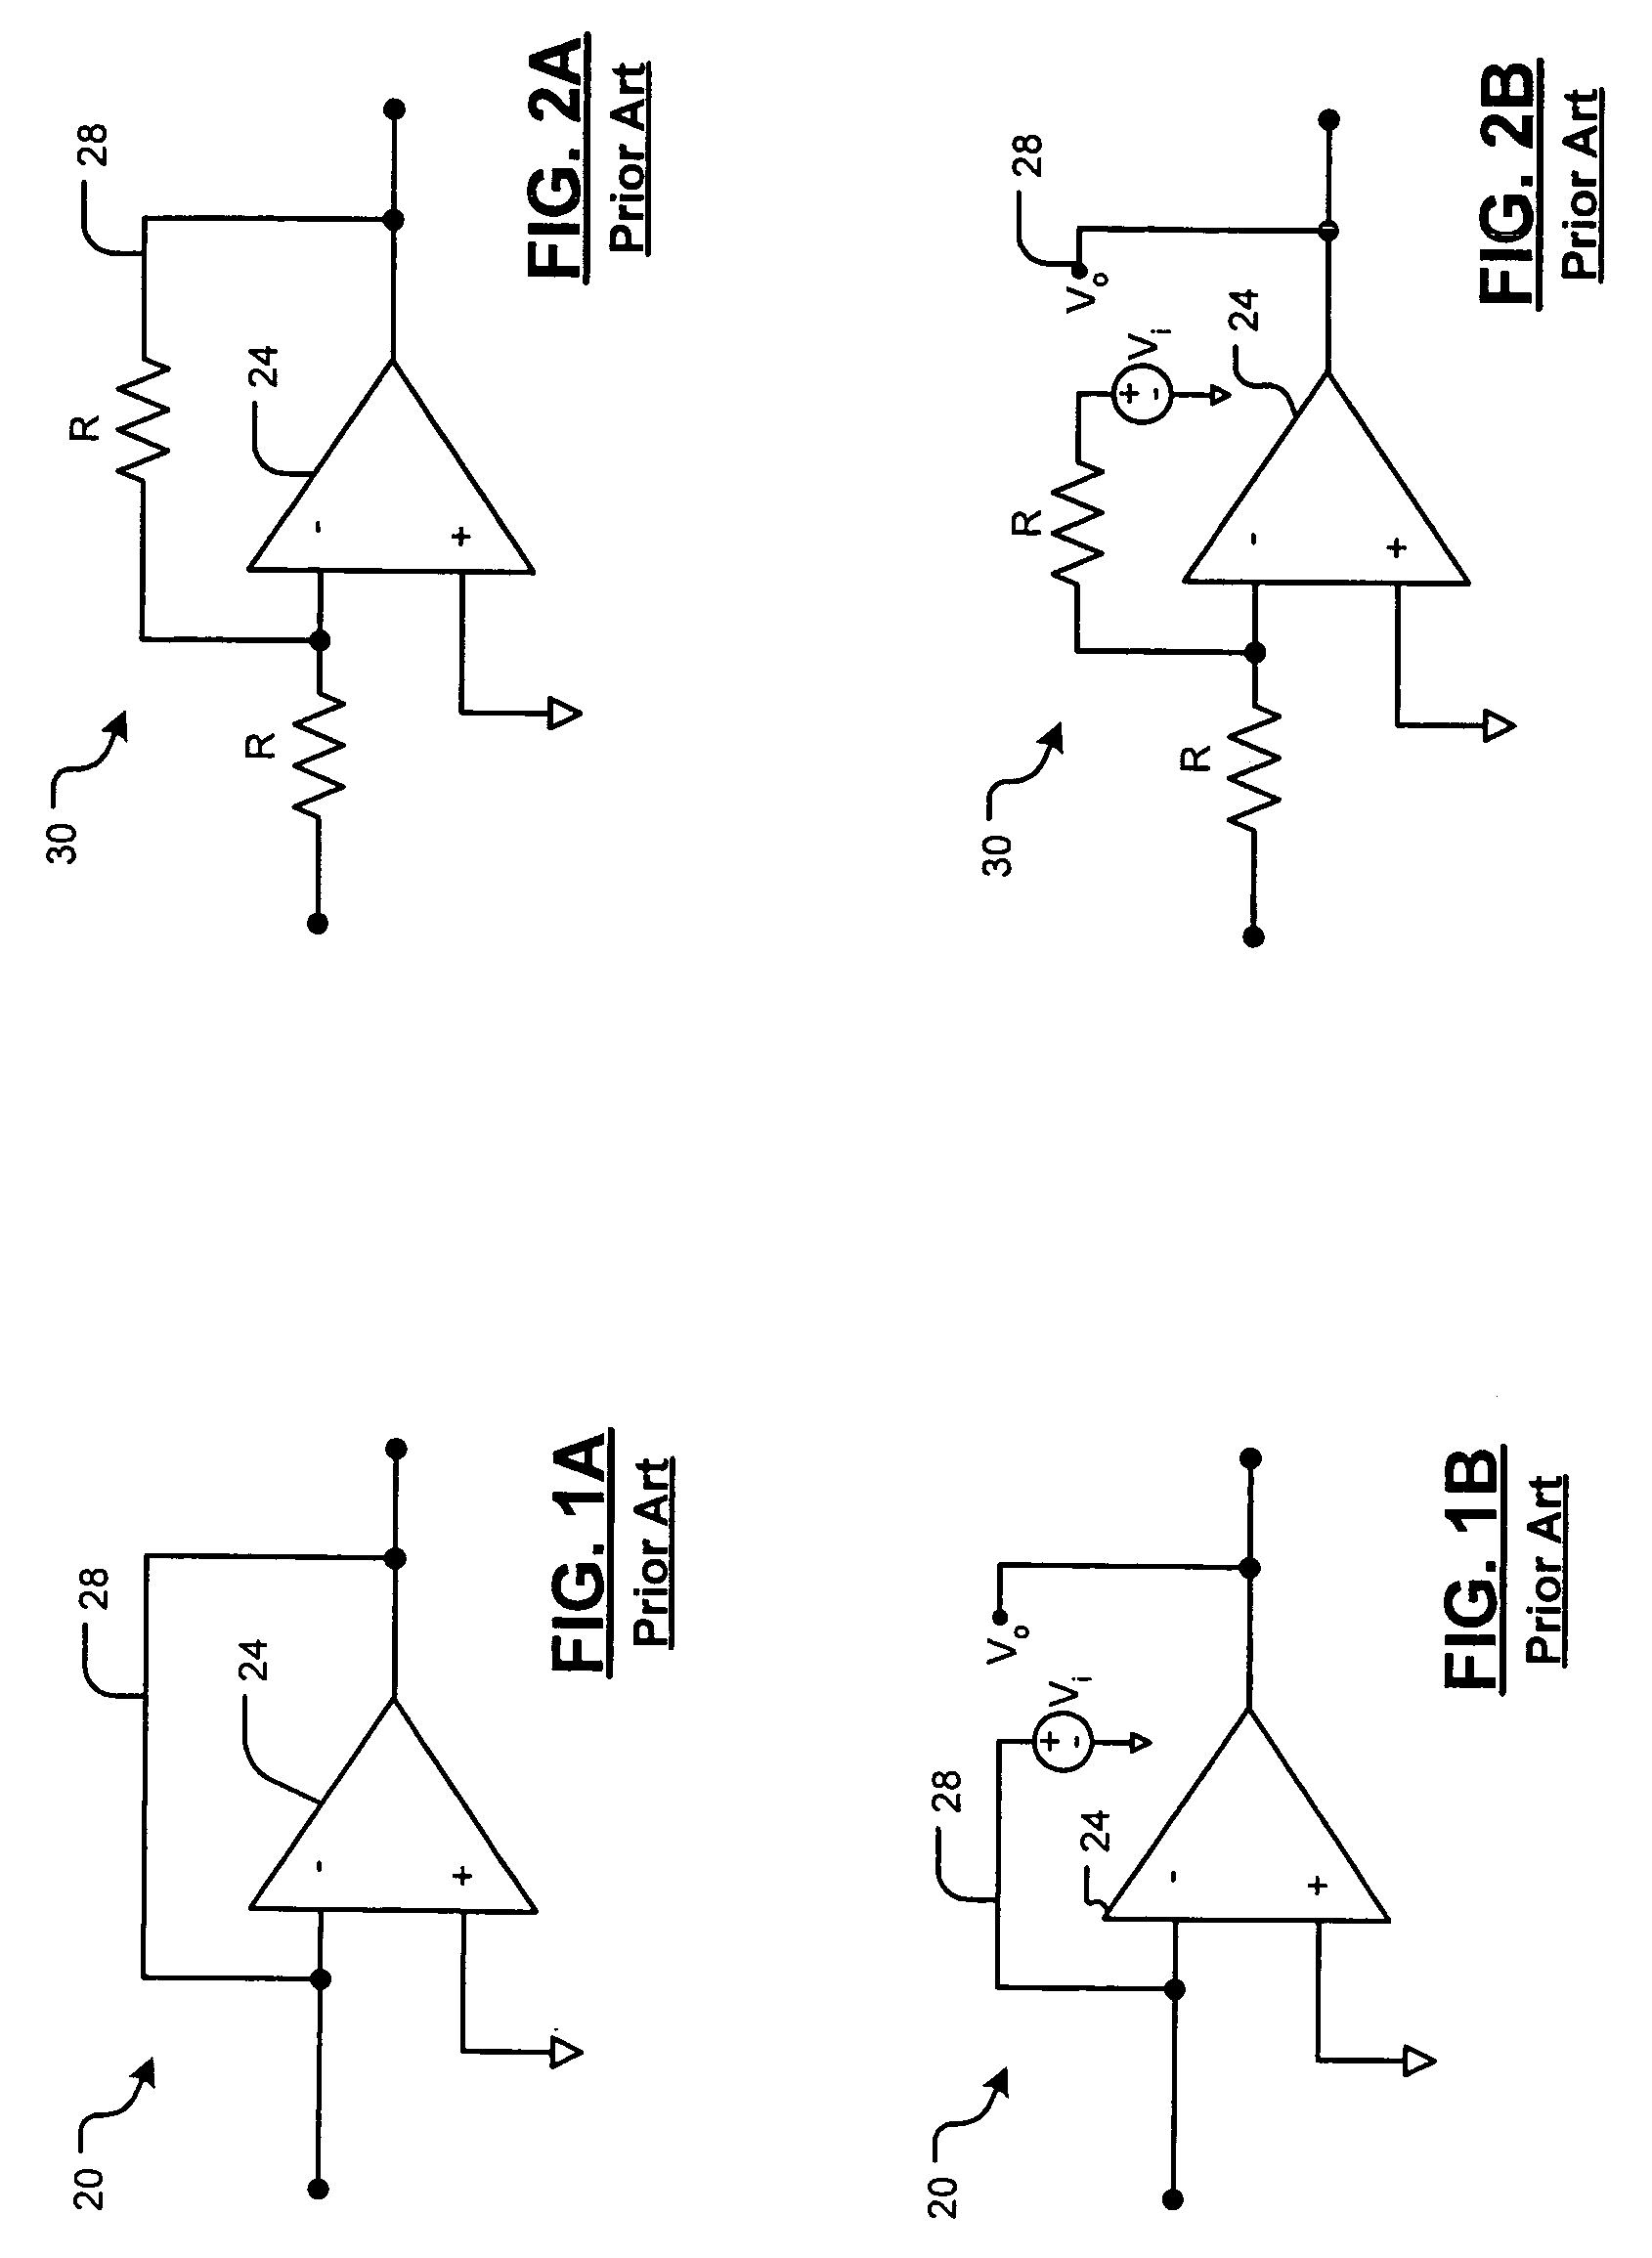 Variable-gain constant-bandwidth transimpedance amplifier